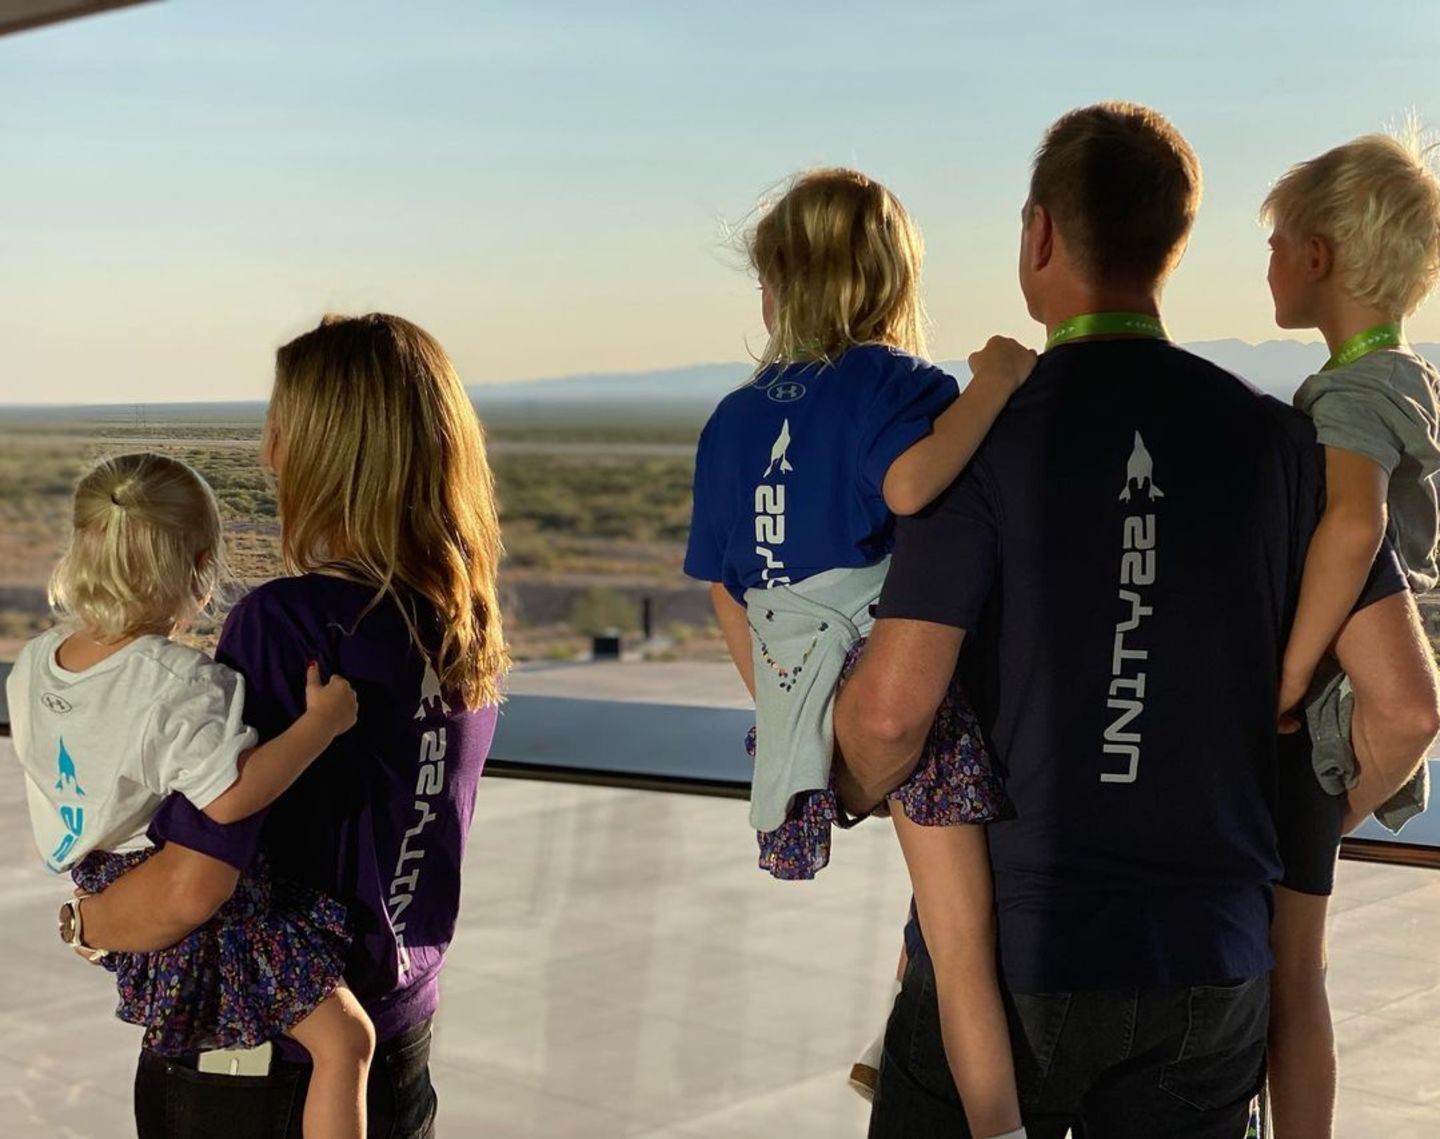 Holly Branson and Freddie Andrewes looking out over Spaceport America ahead of Virgin Galactic's Unity 22 spacelfiht with Richard Branson